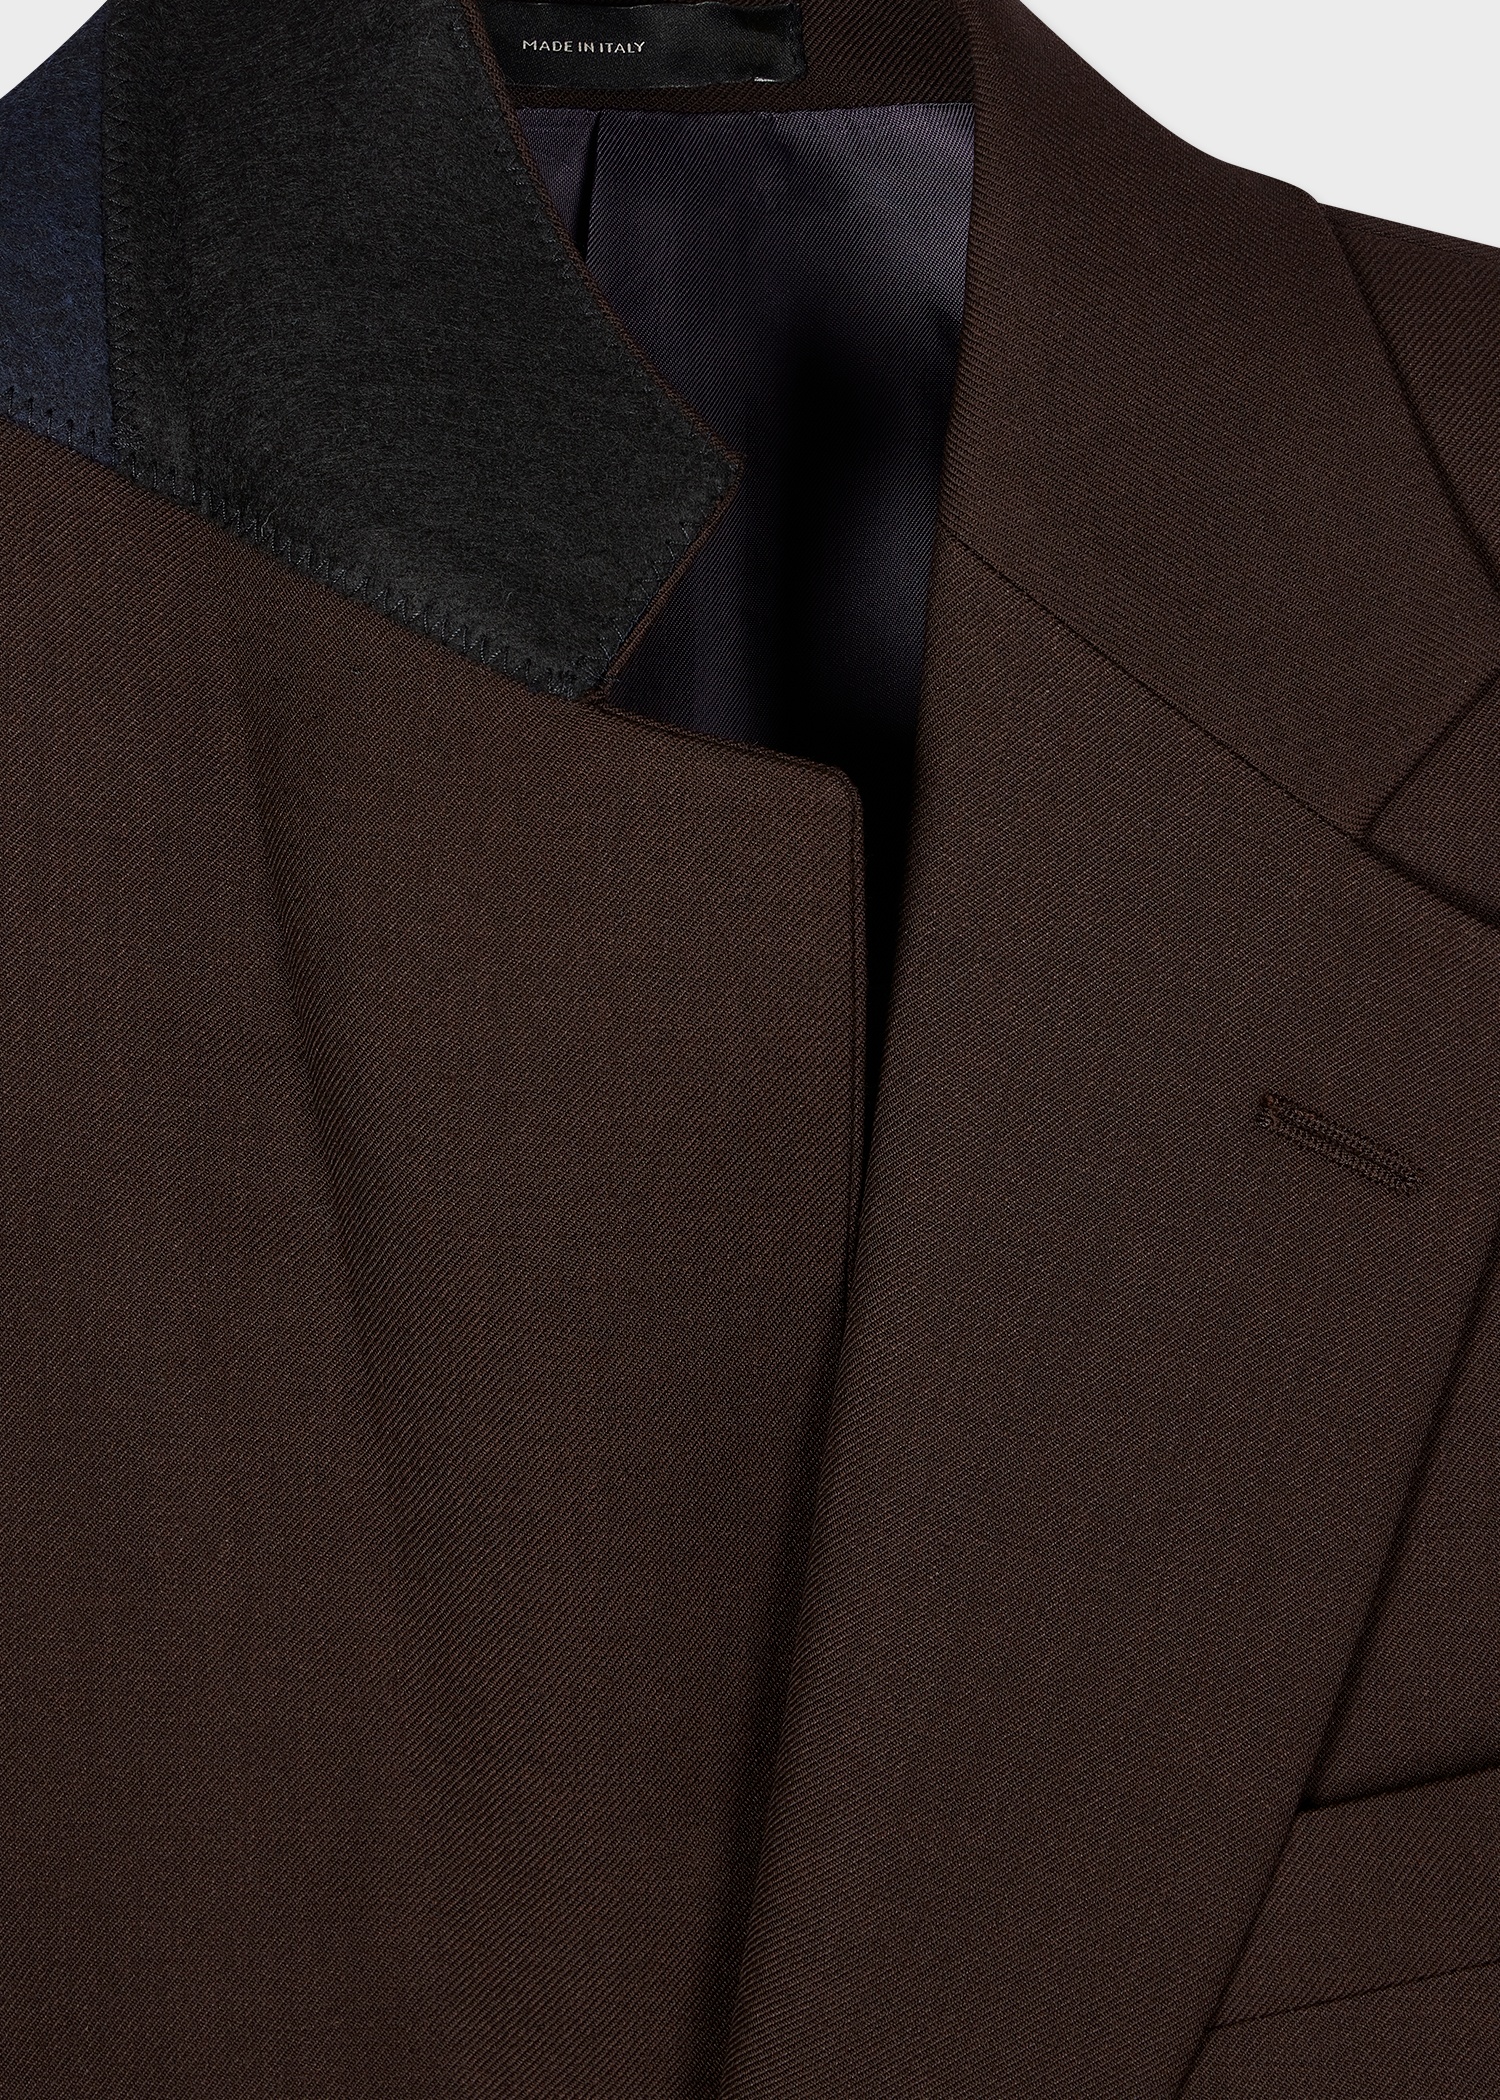 The Brierley - Brown Wool 'A Suit To Travel In' - 3